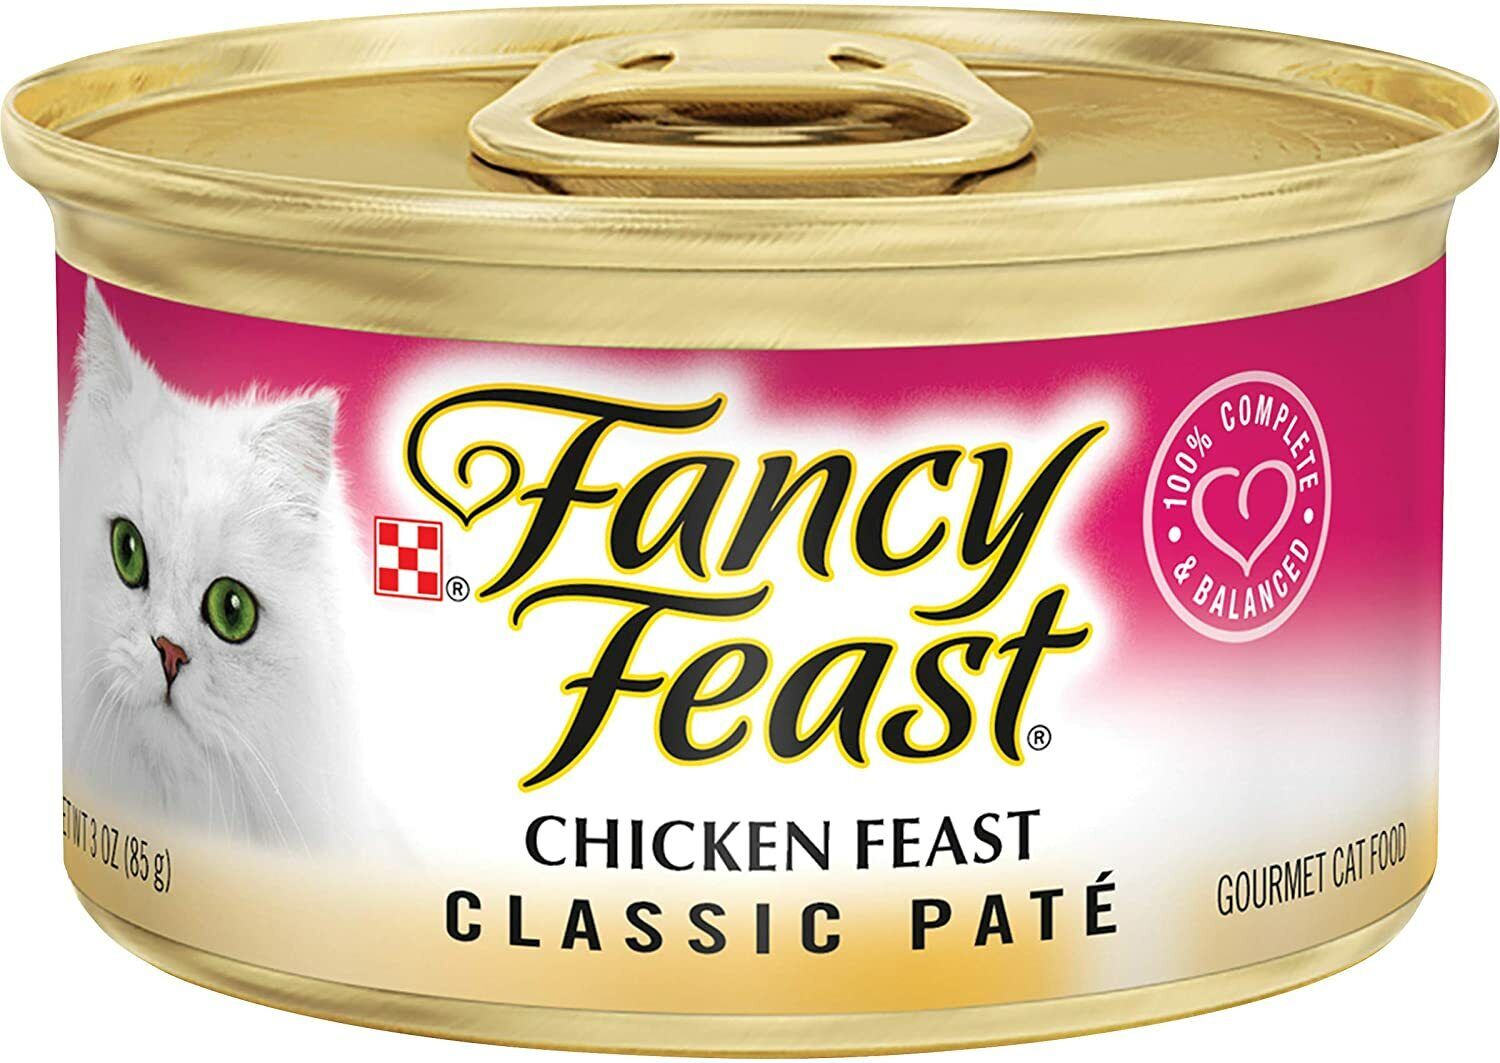 24 Cans Fancy Feast Chicken Feast Classic Pate Gourmet Cat Food